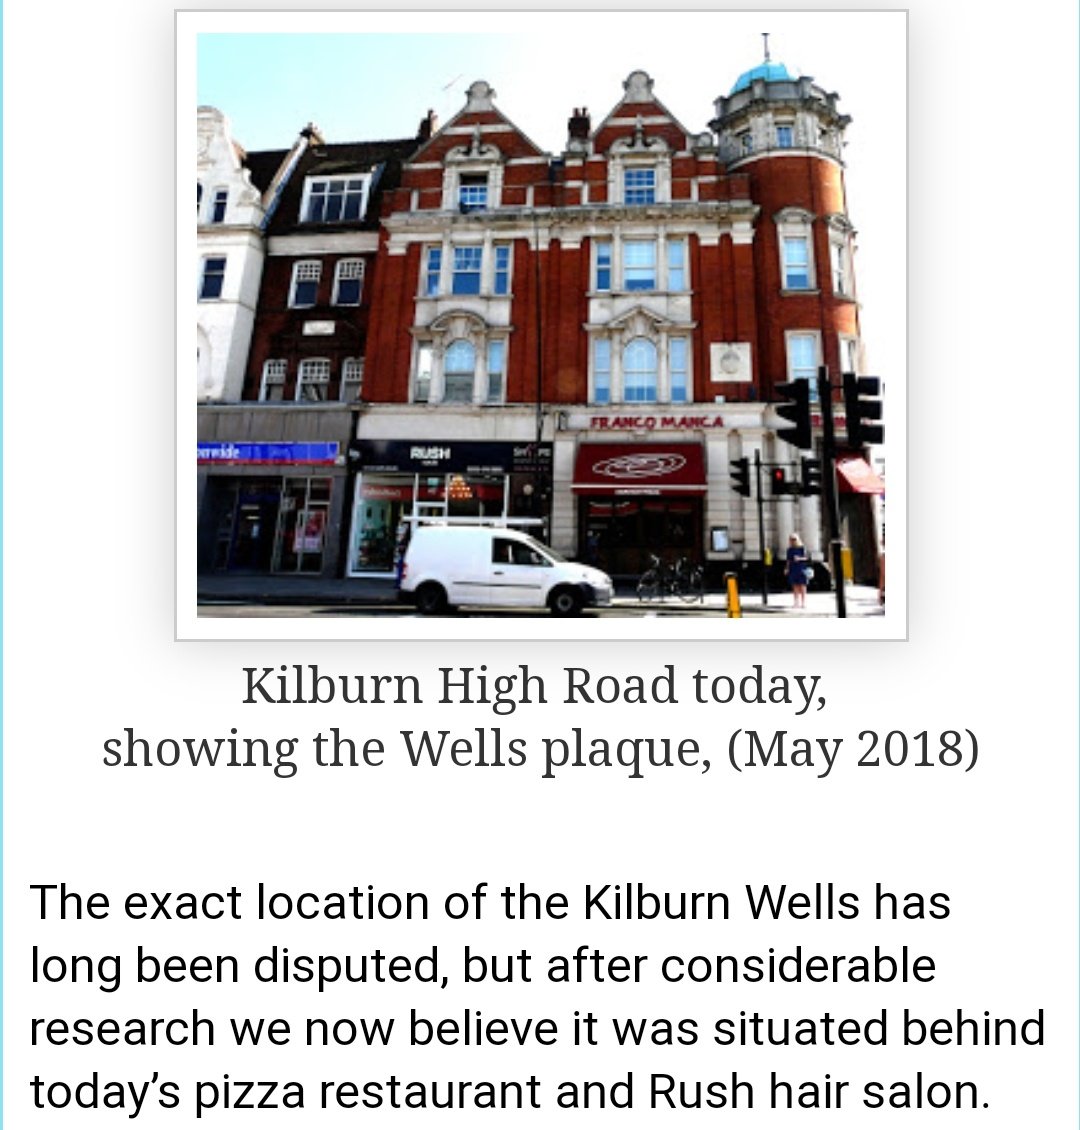 The water from this spring was then discovered to contain properties similar to Epsom Salts and gave rise to spas and pleasure gardens including the Kilburn Wells or Bell Inn.All that is left of it now is a plaque on the wall and floor on Kilburn High Road